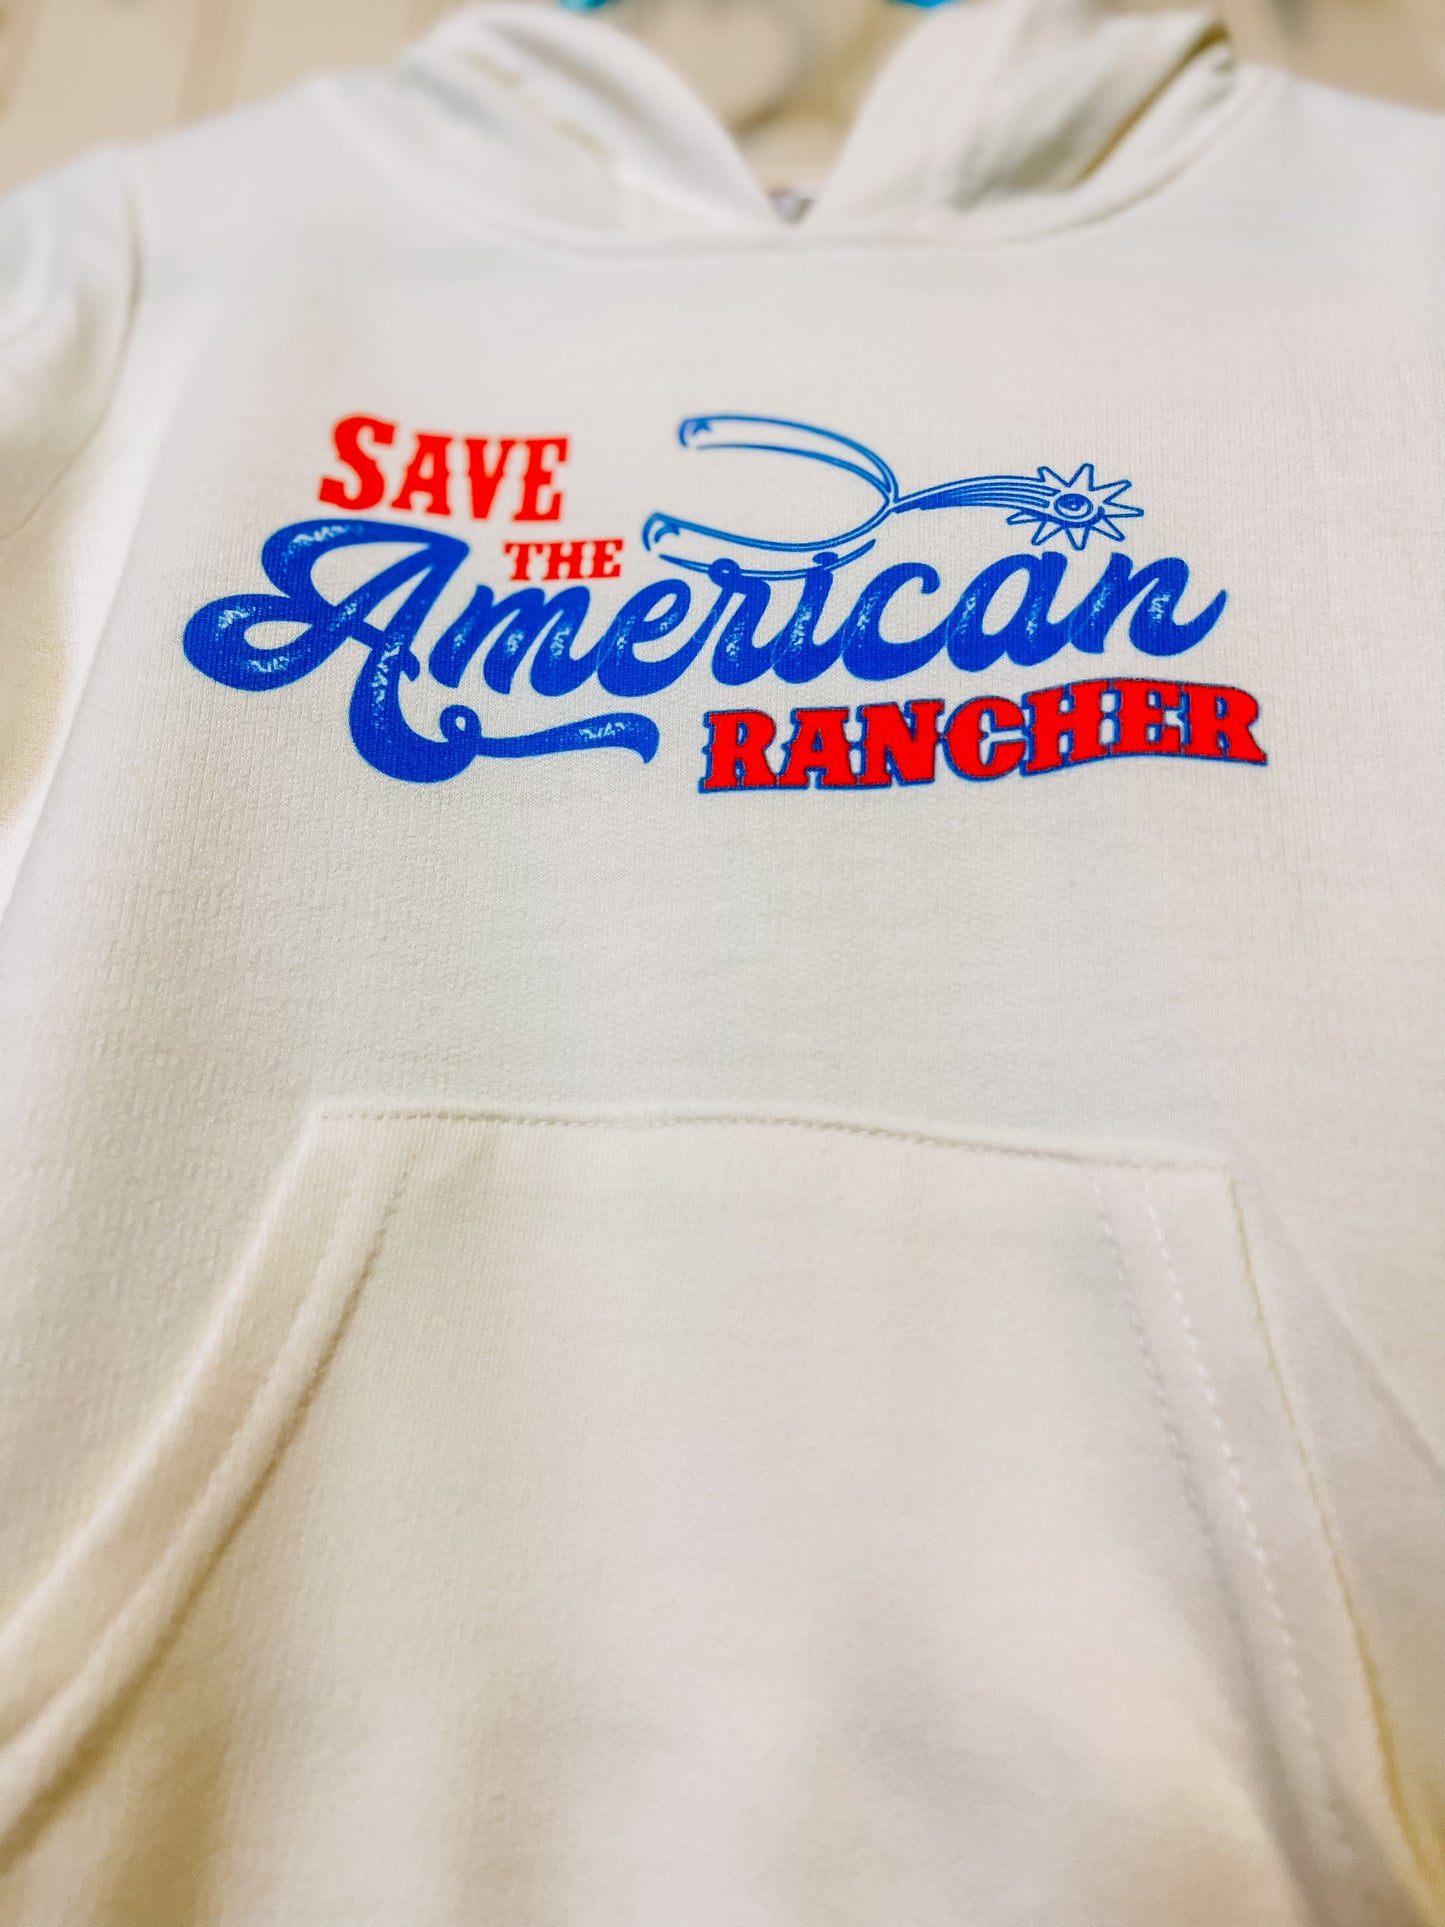 the Save the |American| Rancher hoodie